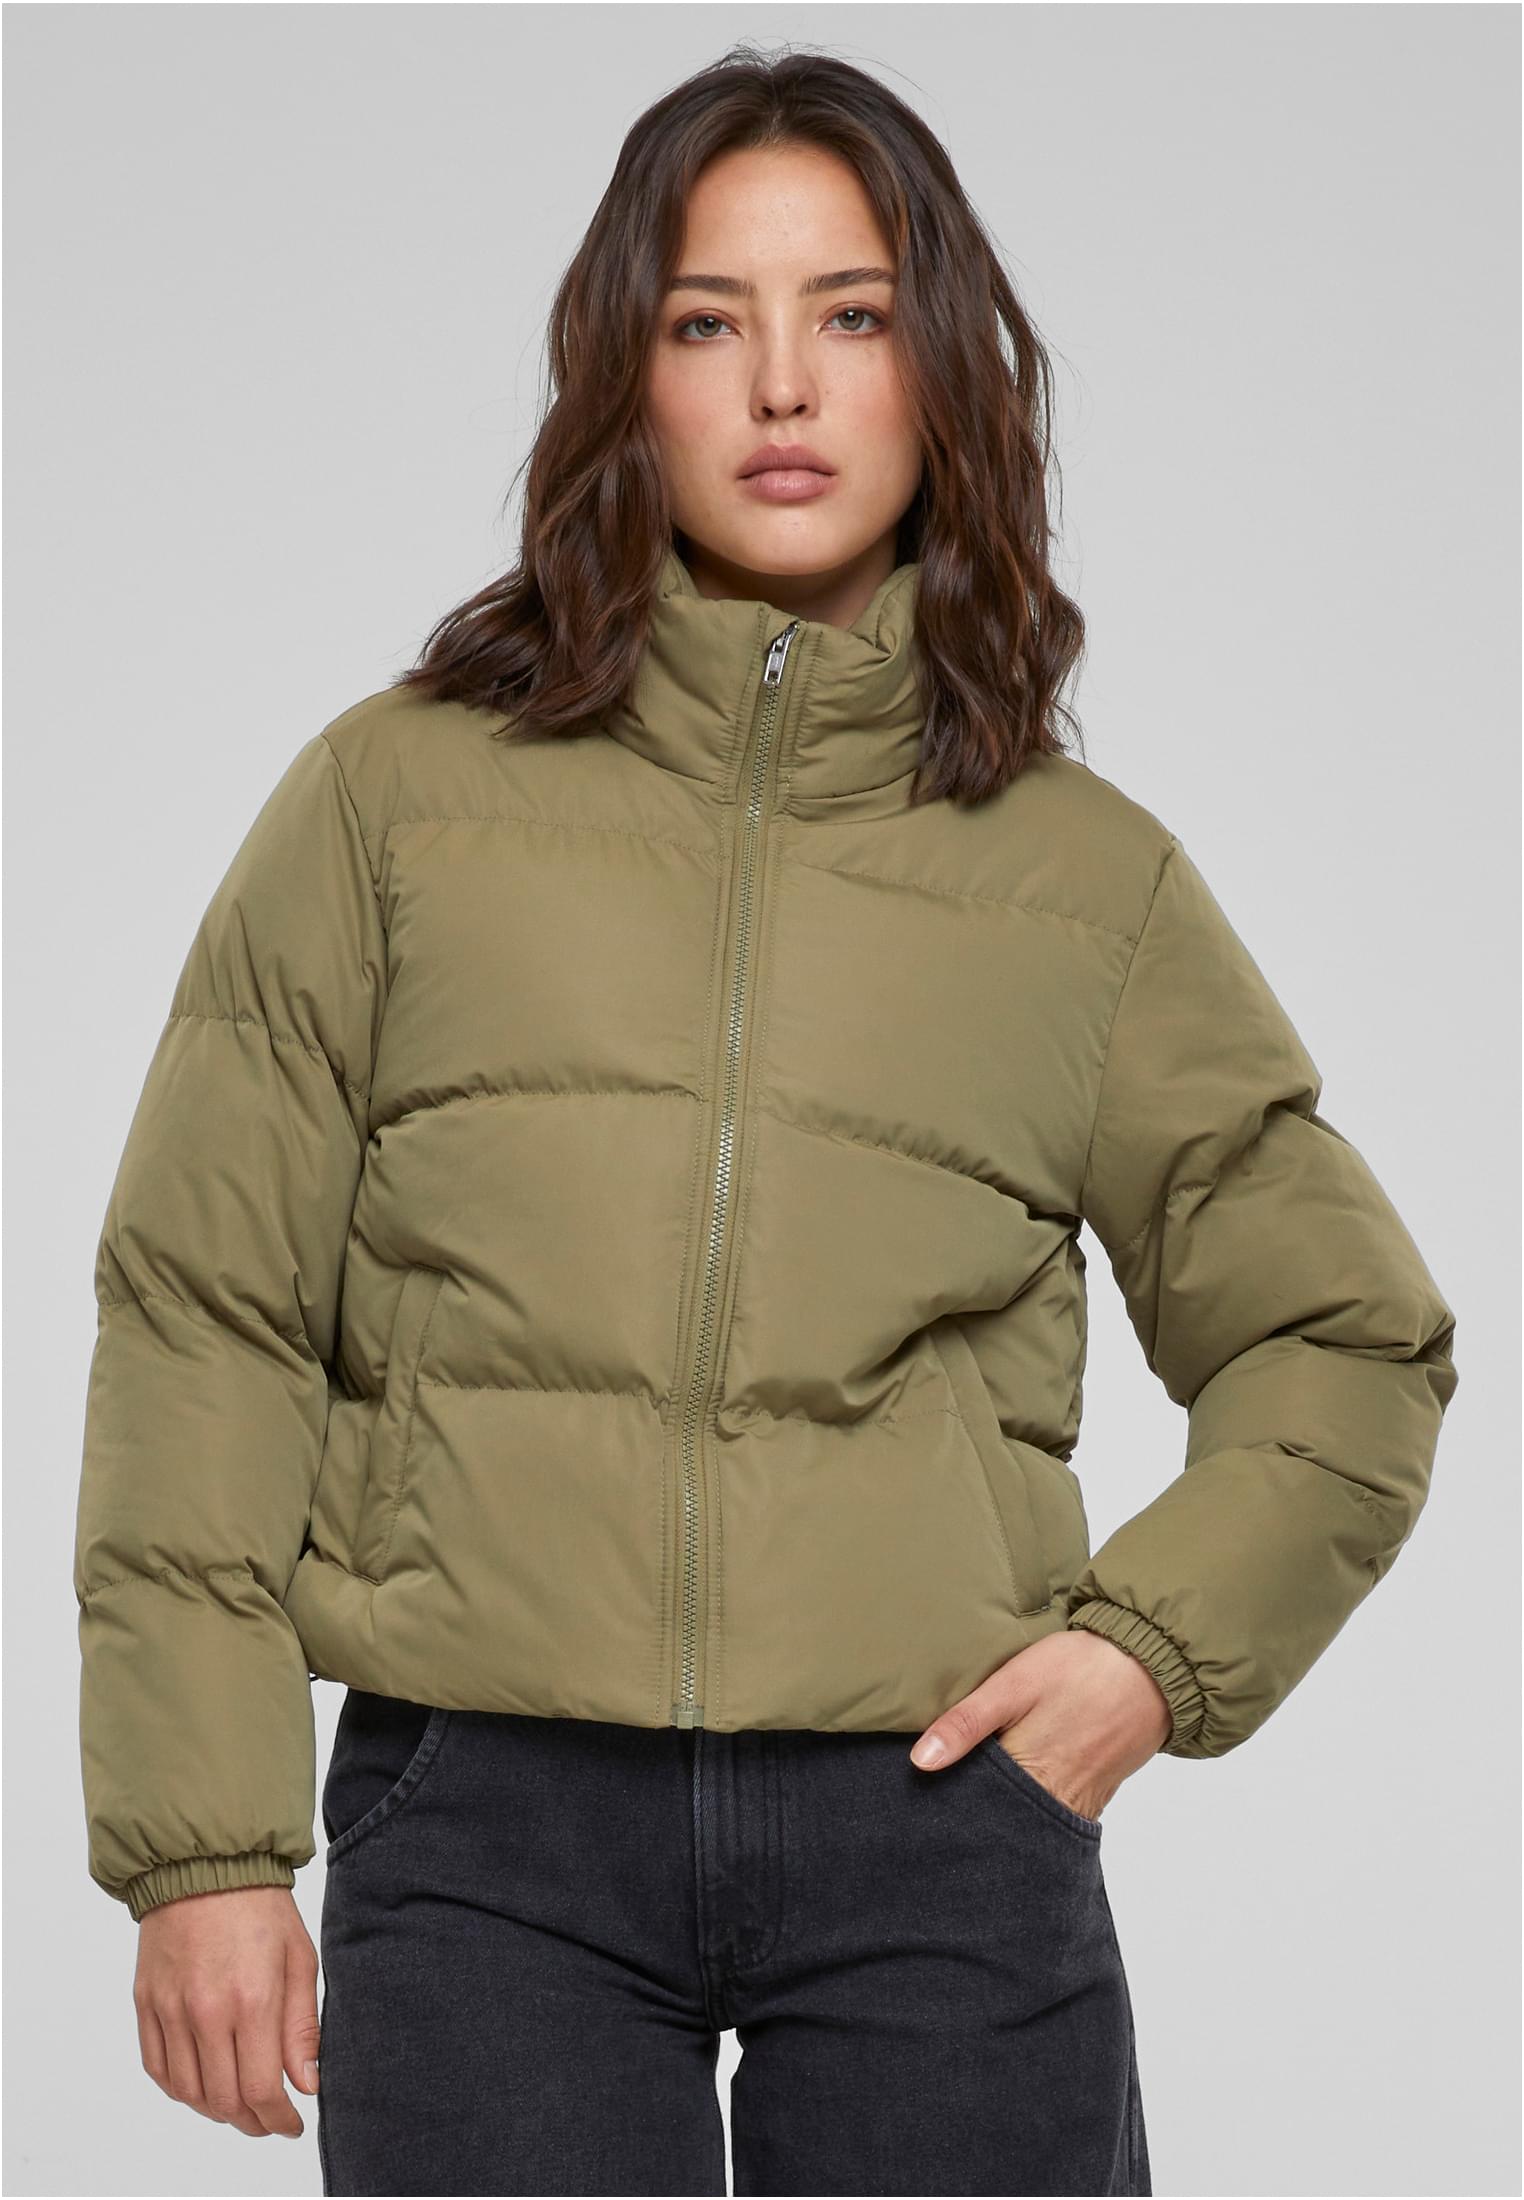 Women's Peached Puffer Tiniolive Short Jacket